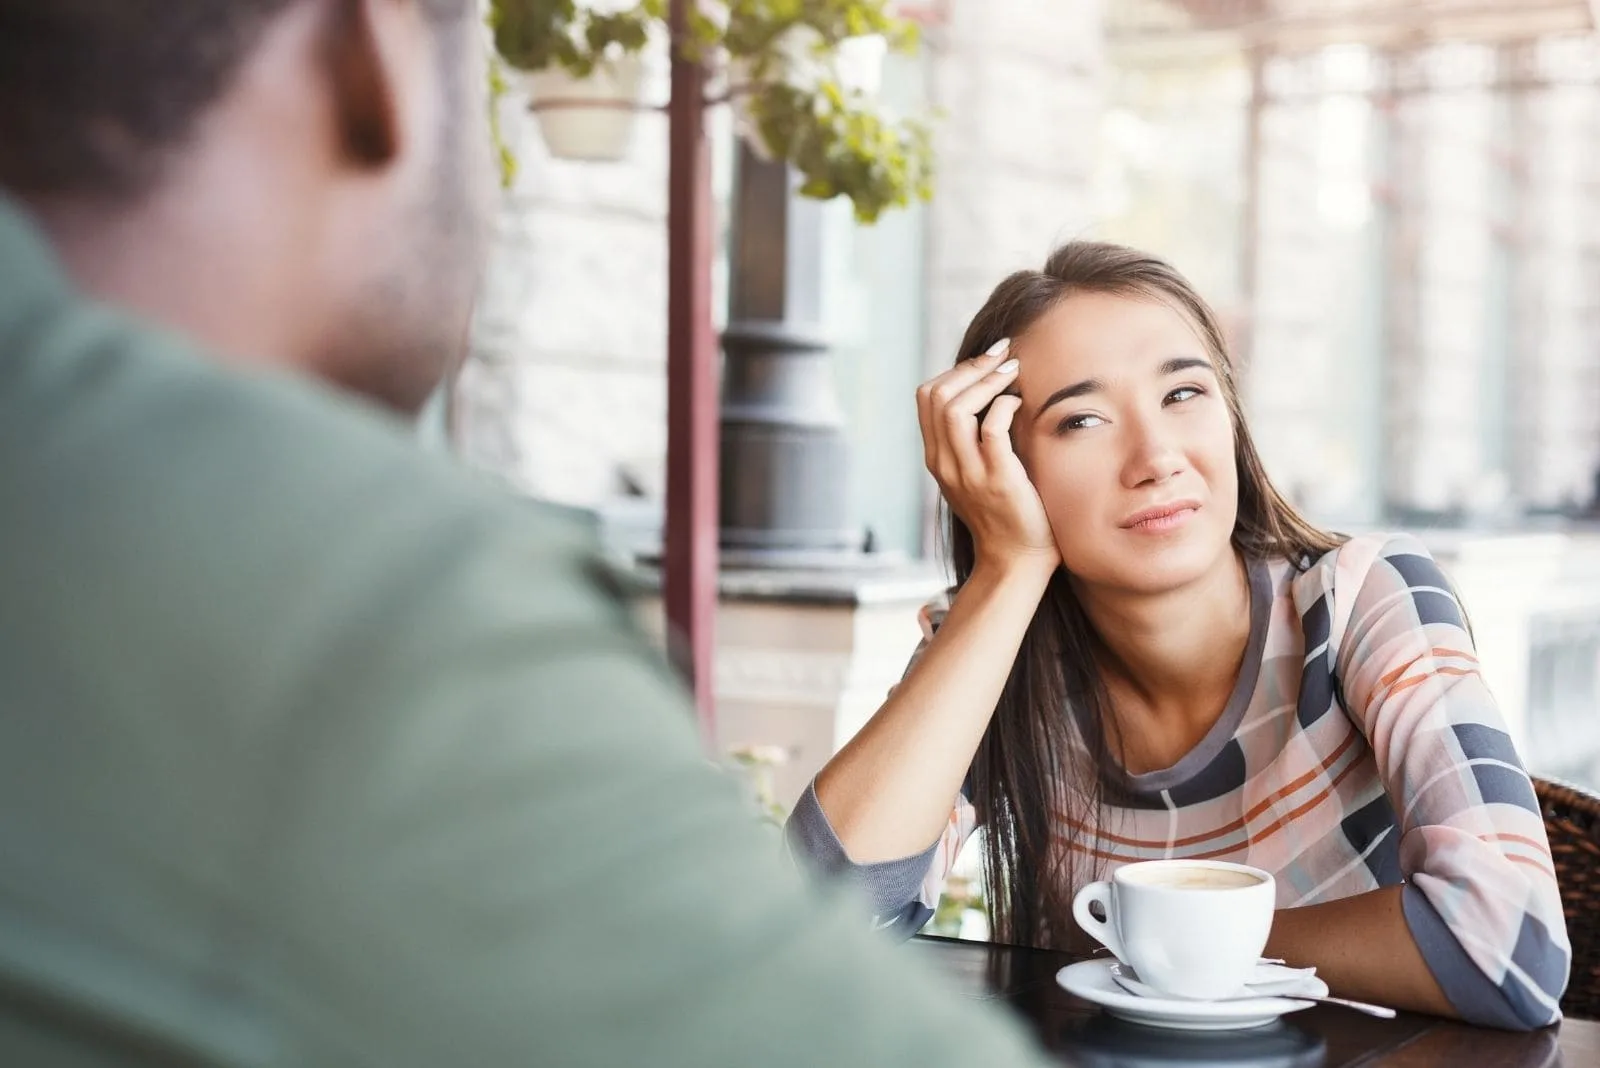 bored woman looking at the man with uninteresting look on her face in date at a cafe